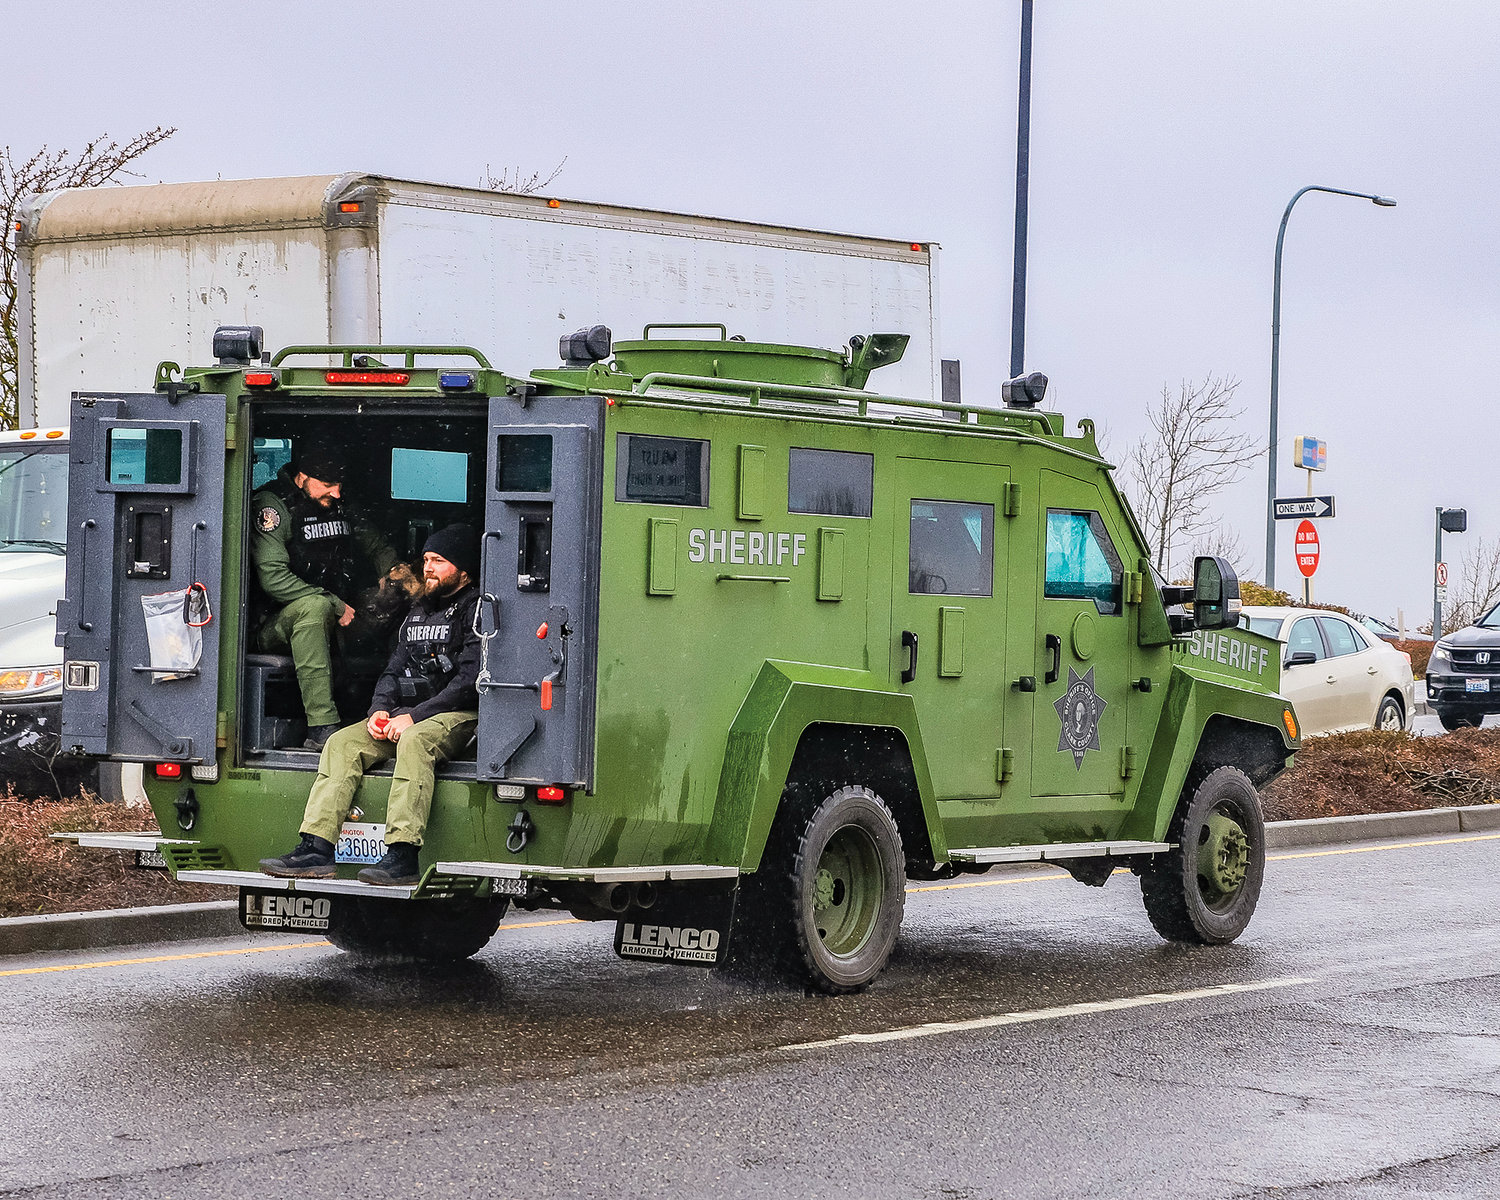 Deputy Drew Kennison is a member of the Southwest Washington Regional SWAT team. The Bearcat SWAT vehicle greeted Deputy Kennison at the Pioneer Street and South 56th Place roundabout on Wednesday, March 8 after Kennison was released from the hospital and rehabilitation facility in Portland, OR. .